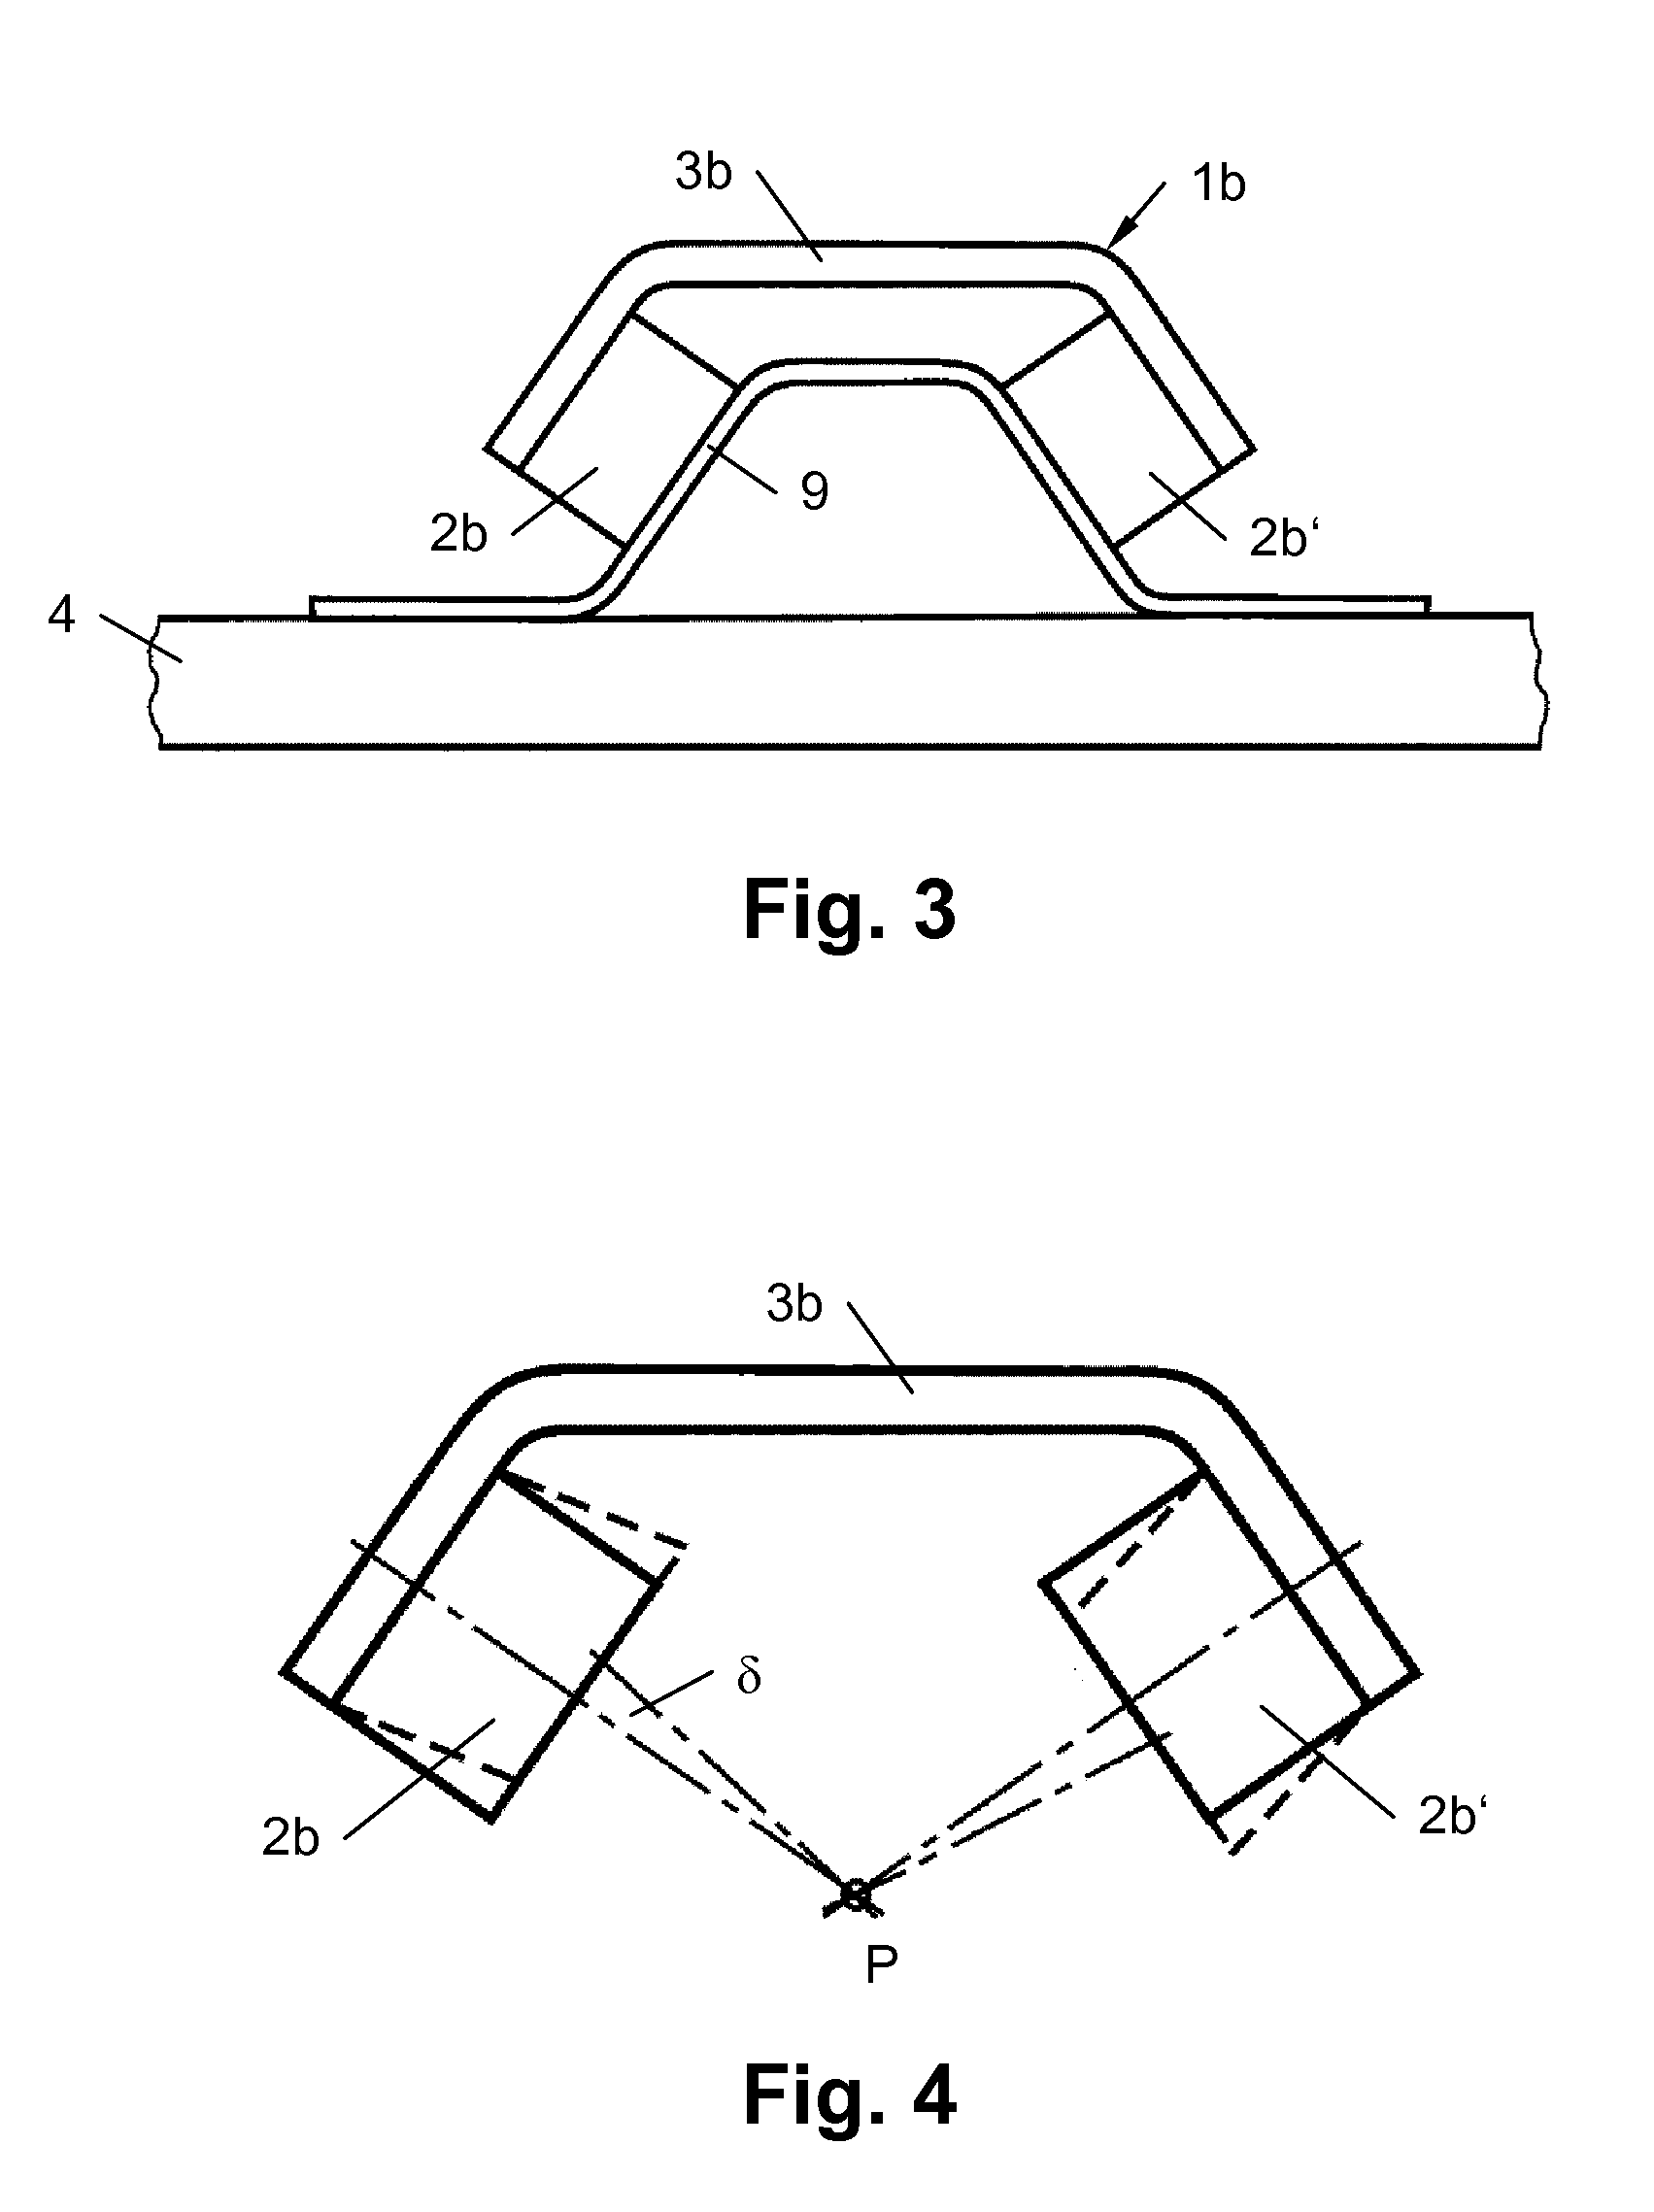 Leaf spring having a rigidly connected elastic connecting body for a motor vehicle